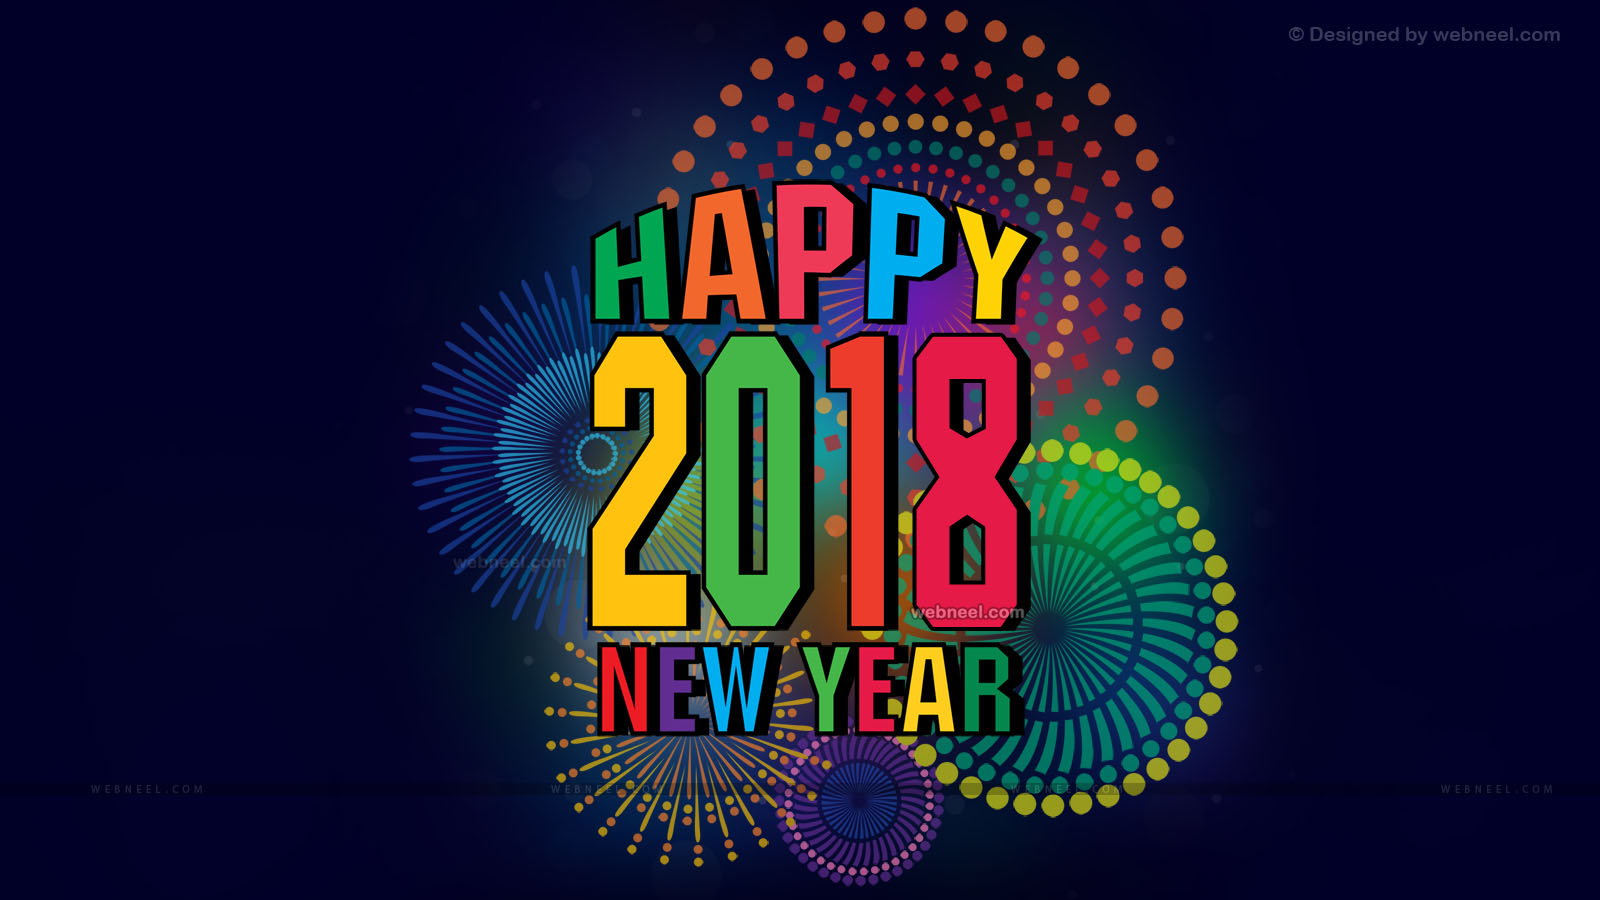 2018 Wallpaper Happy New Year 2018 Happy New Year HD Wallpapers Download Free Map Images Wallpaper [wallpaper376.blogspot.com]